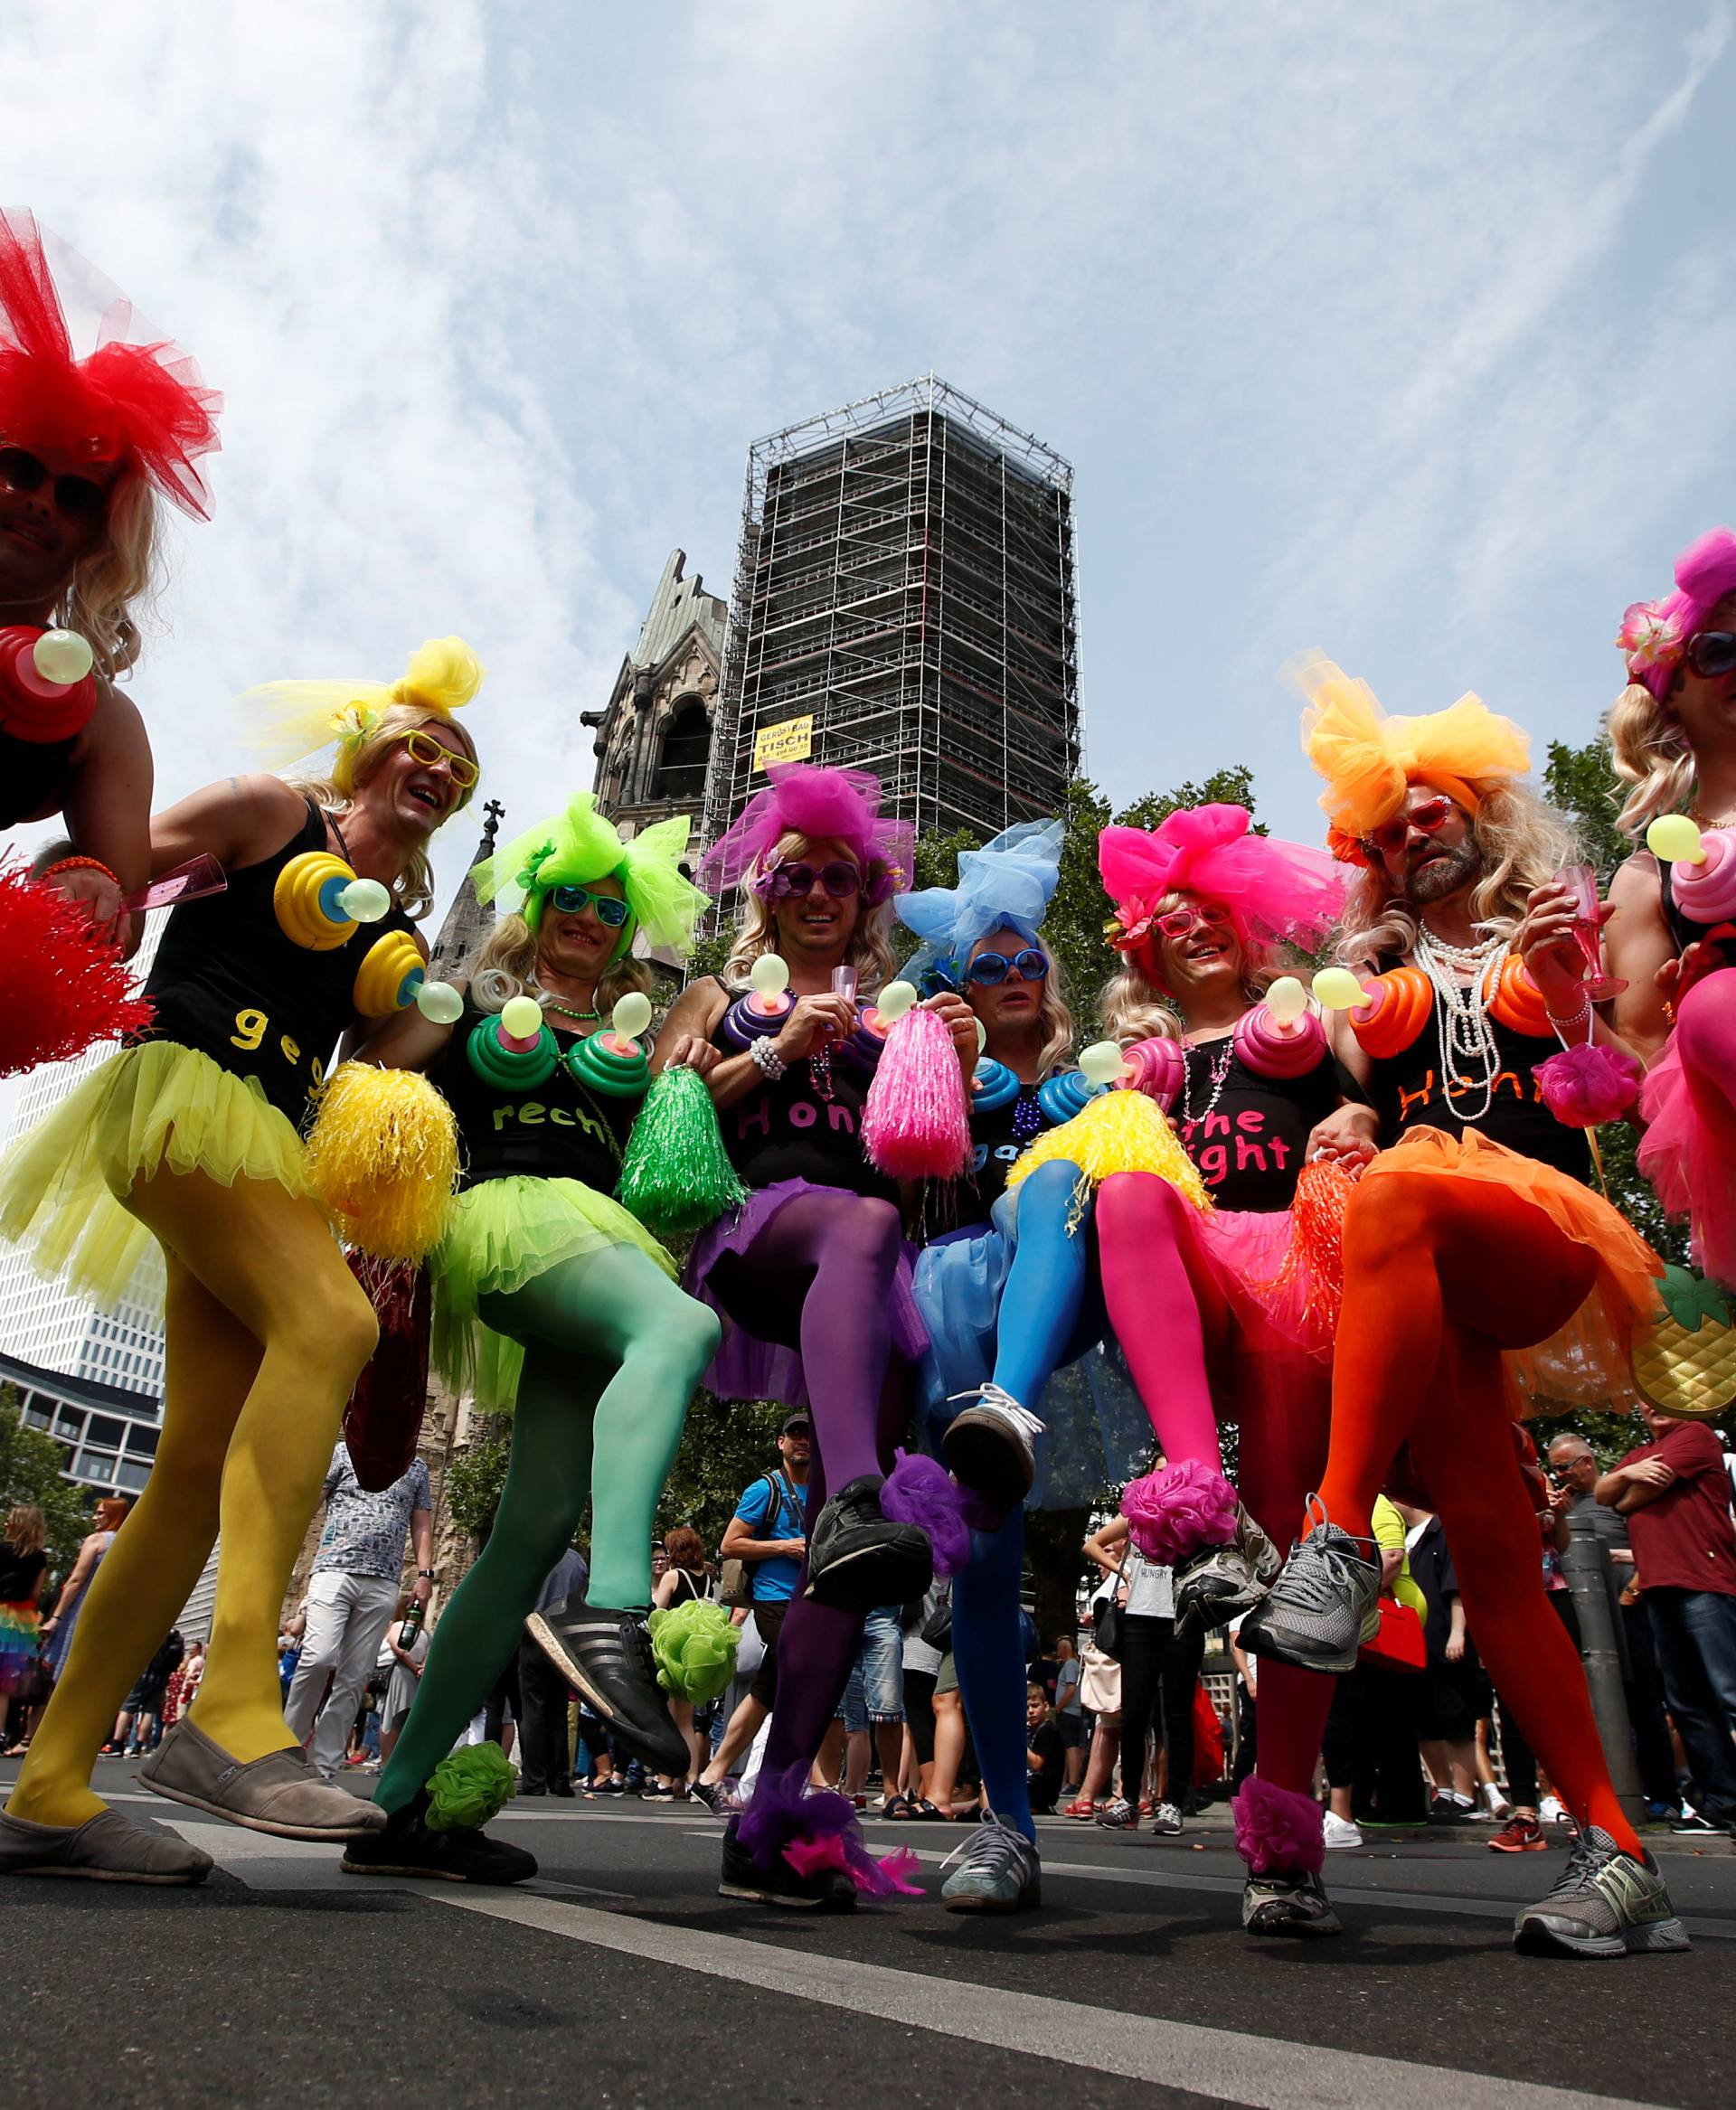 Revellers take part in the annual Gay Pride parade, also called Christopher Street Day parade (CSD), in Berlin